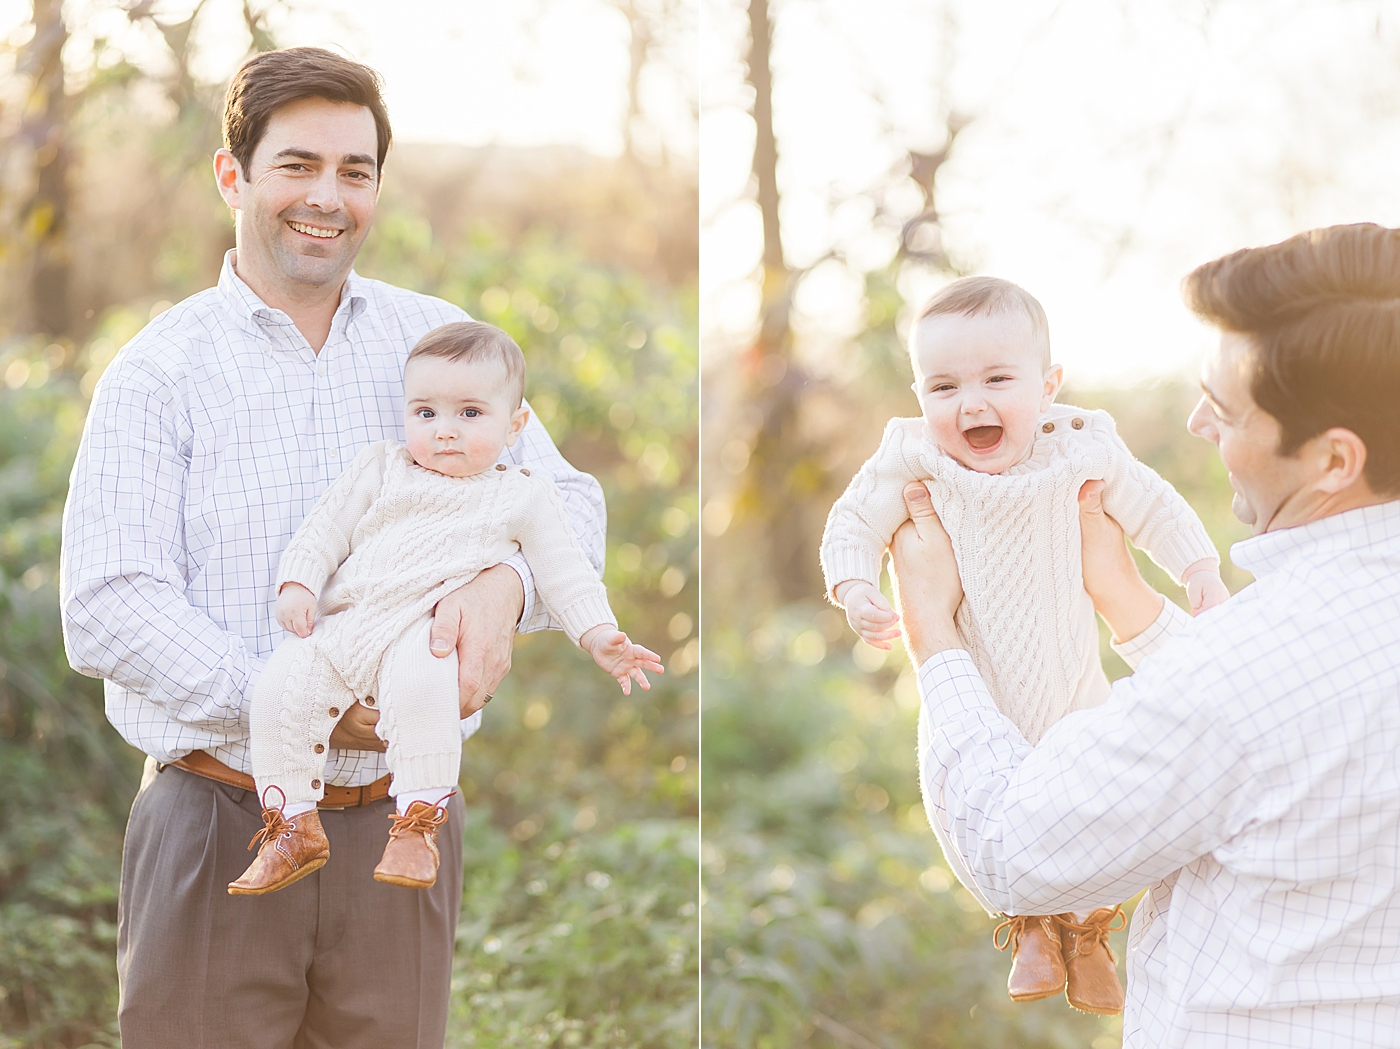 Father-son photos during outdoor family session in Houston TX. Photo by Fresh Light Photography.